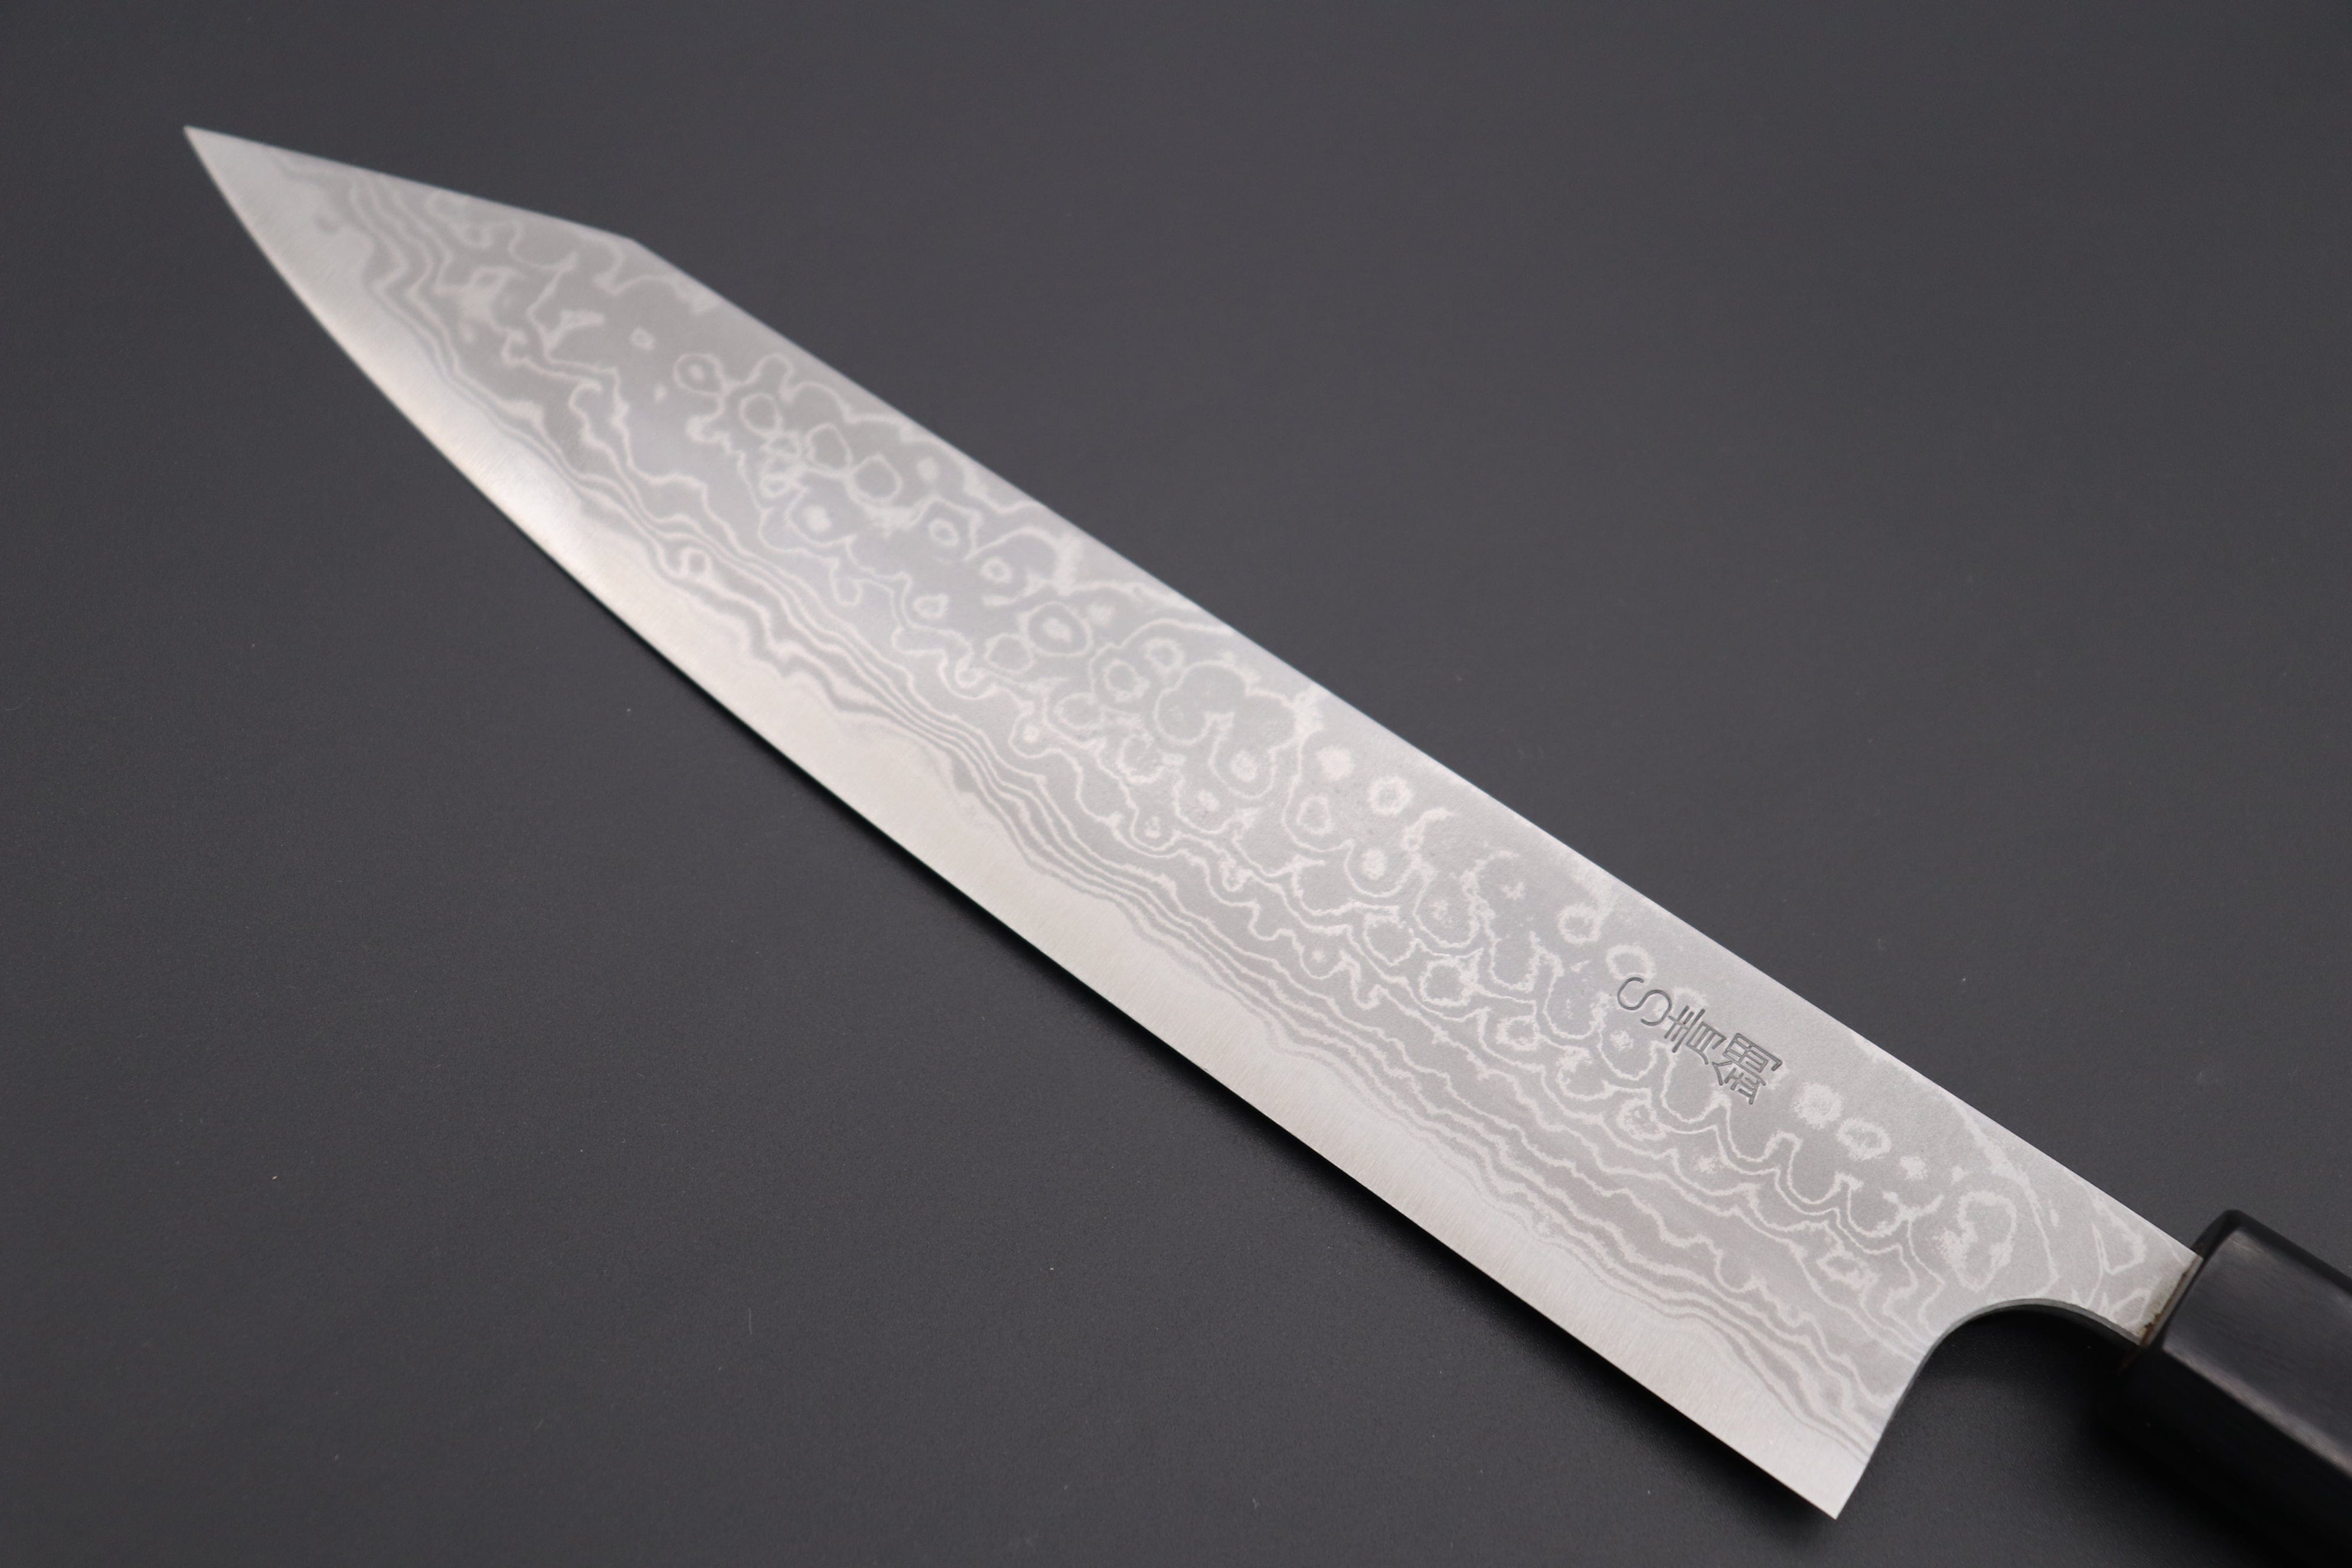 Chef Knife 9.3 Inch Japanese Damascus Steel Blade Premium Quality